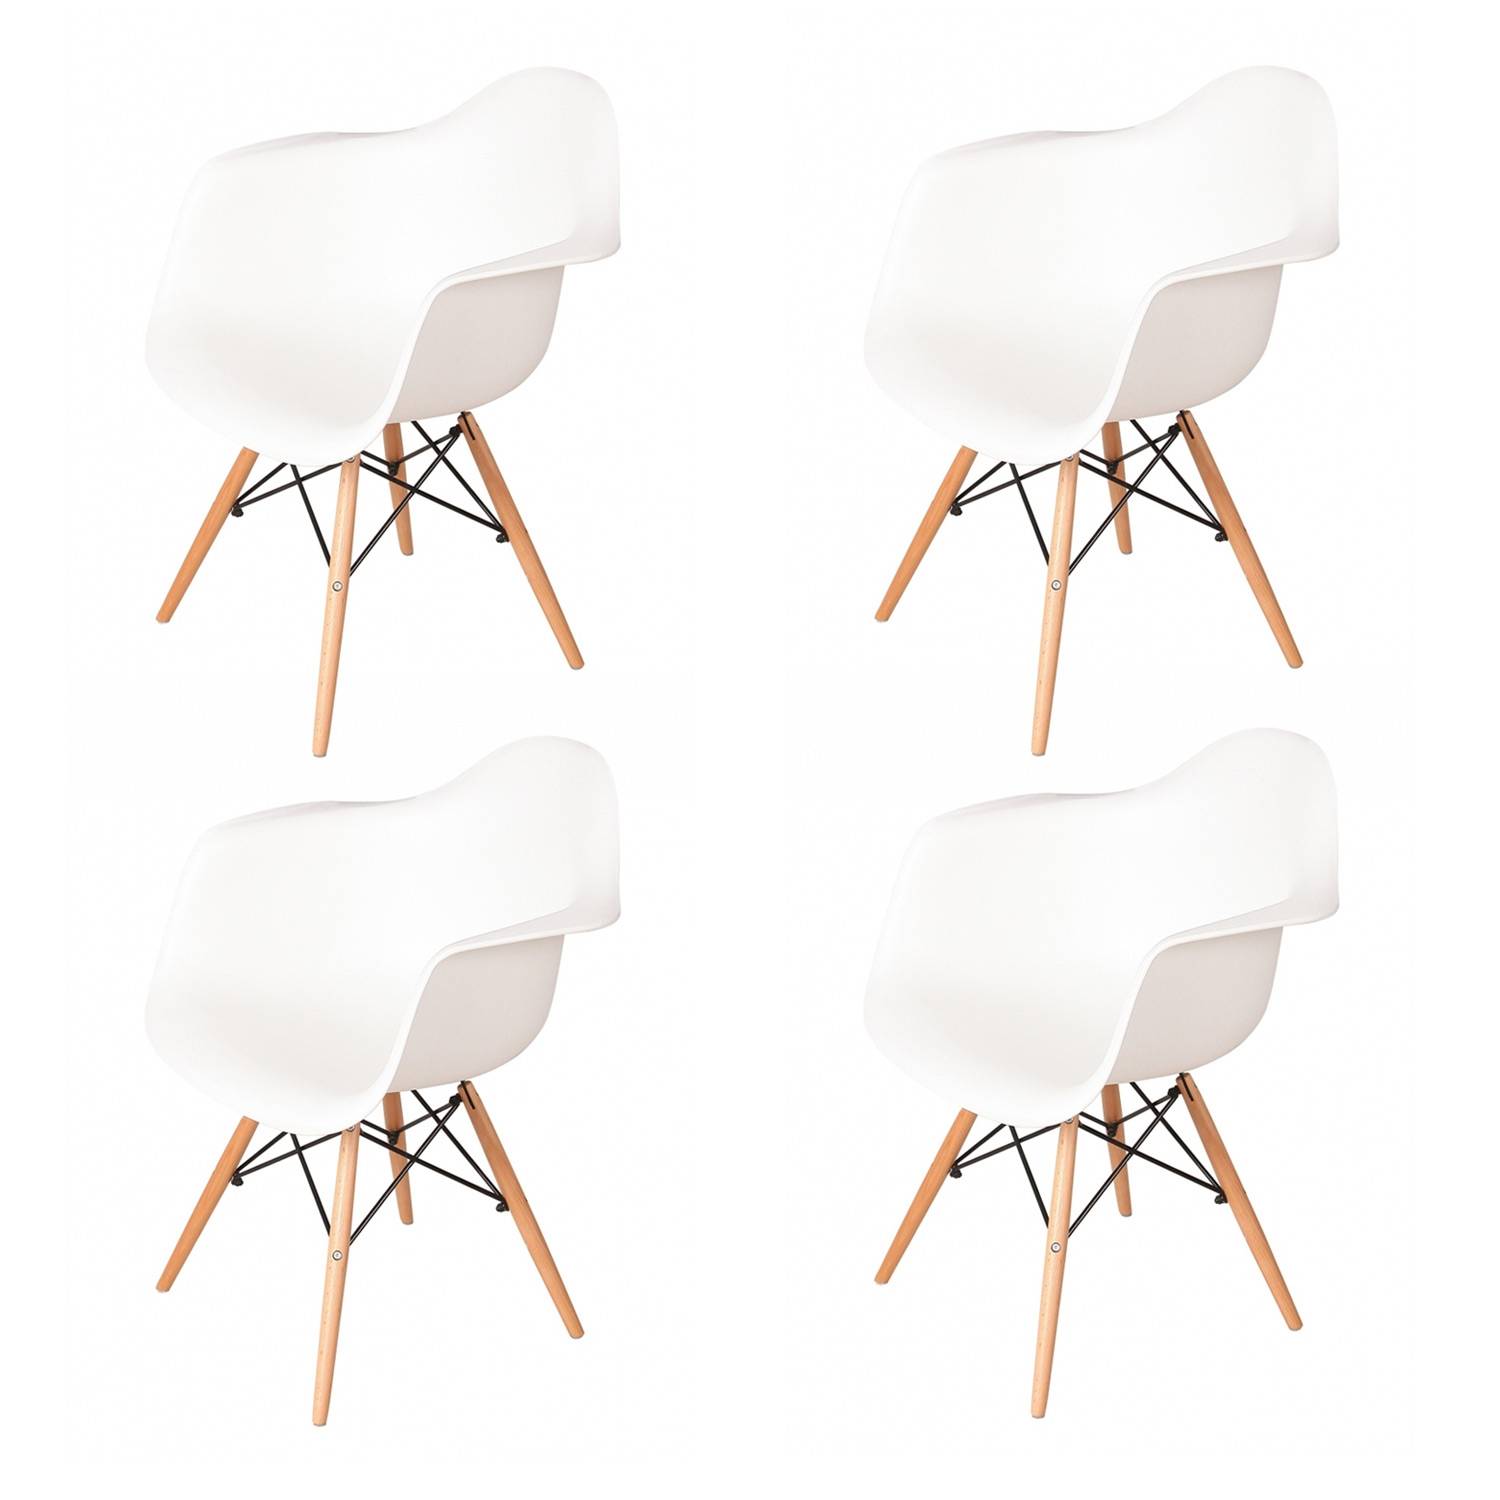 PACK 4 SILLONES TOWER WOOD BLANCOS